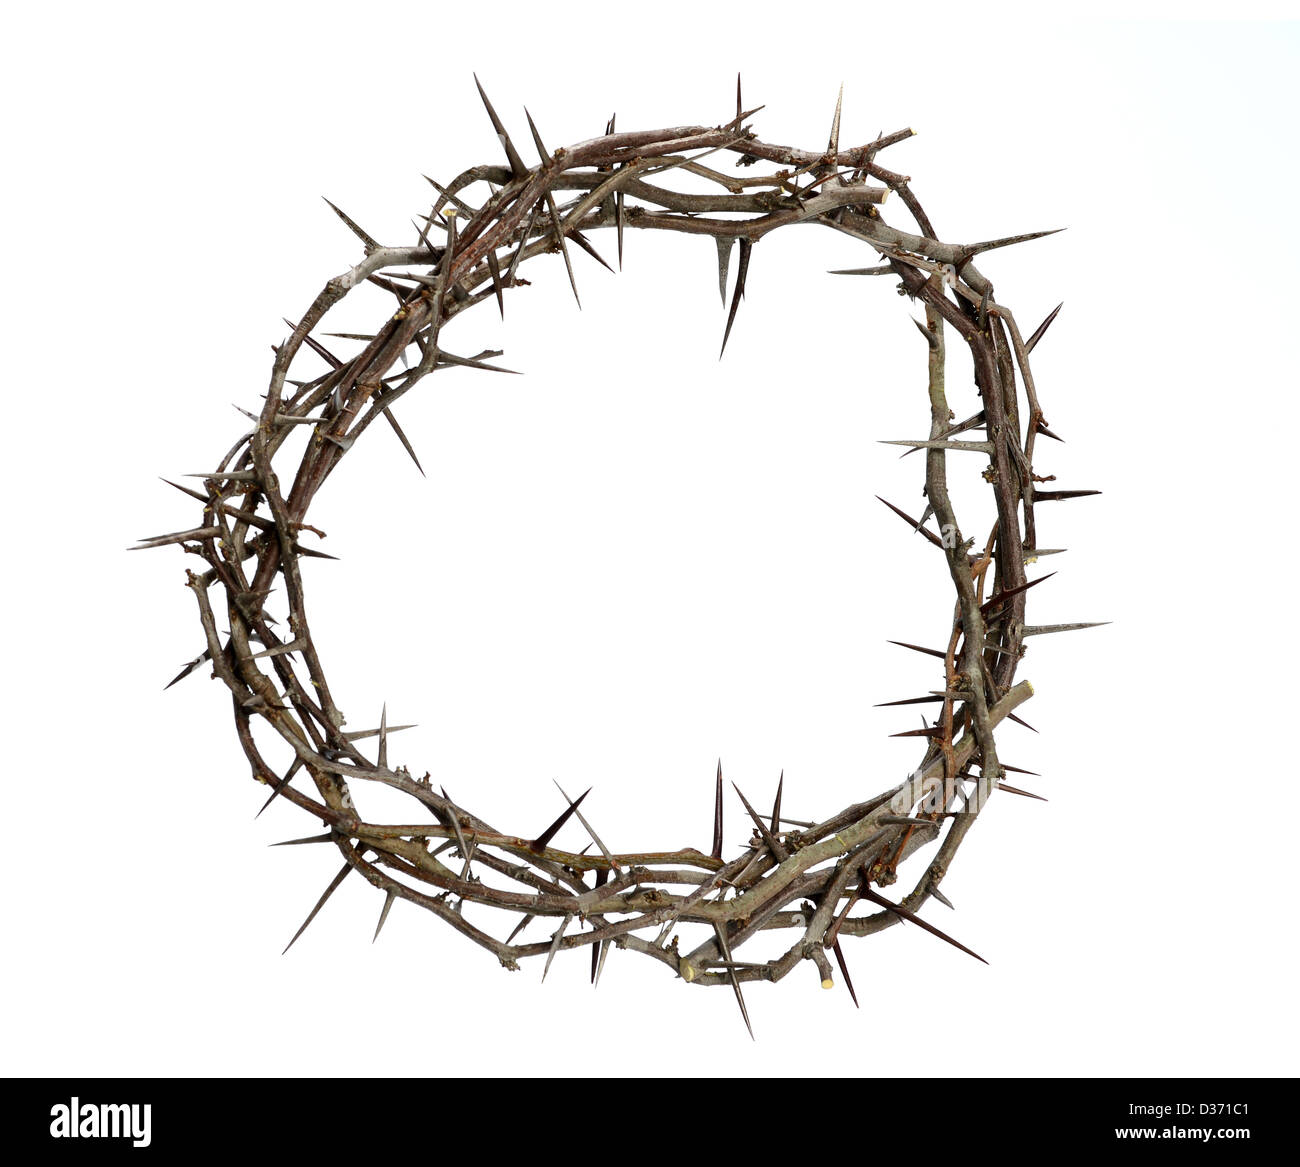 Crown Thorns Image Isolated White Background Stock Vector by